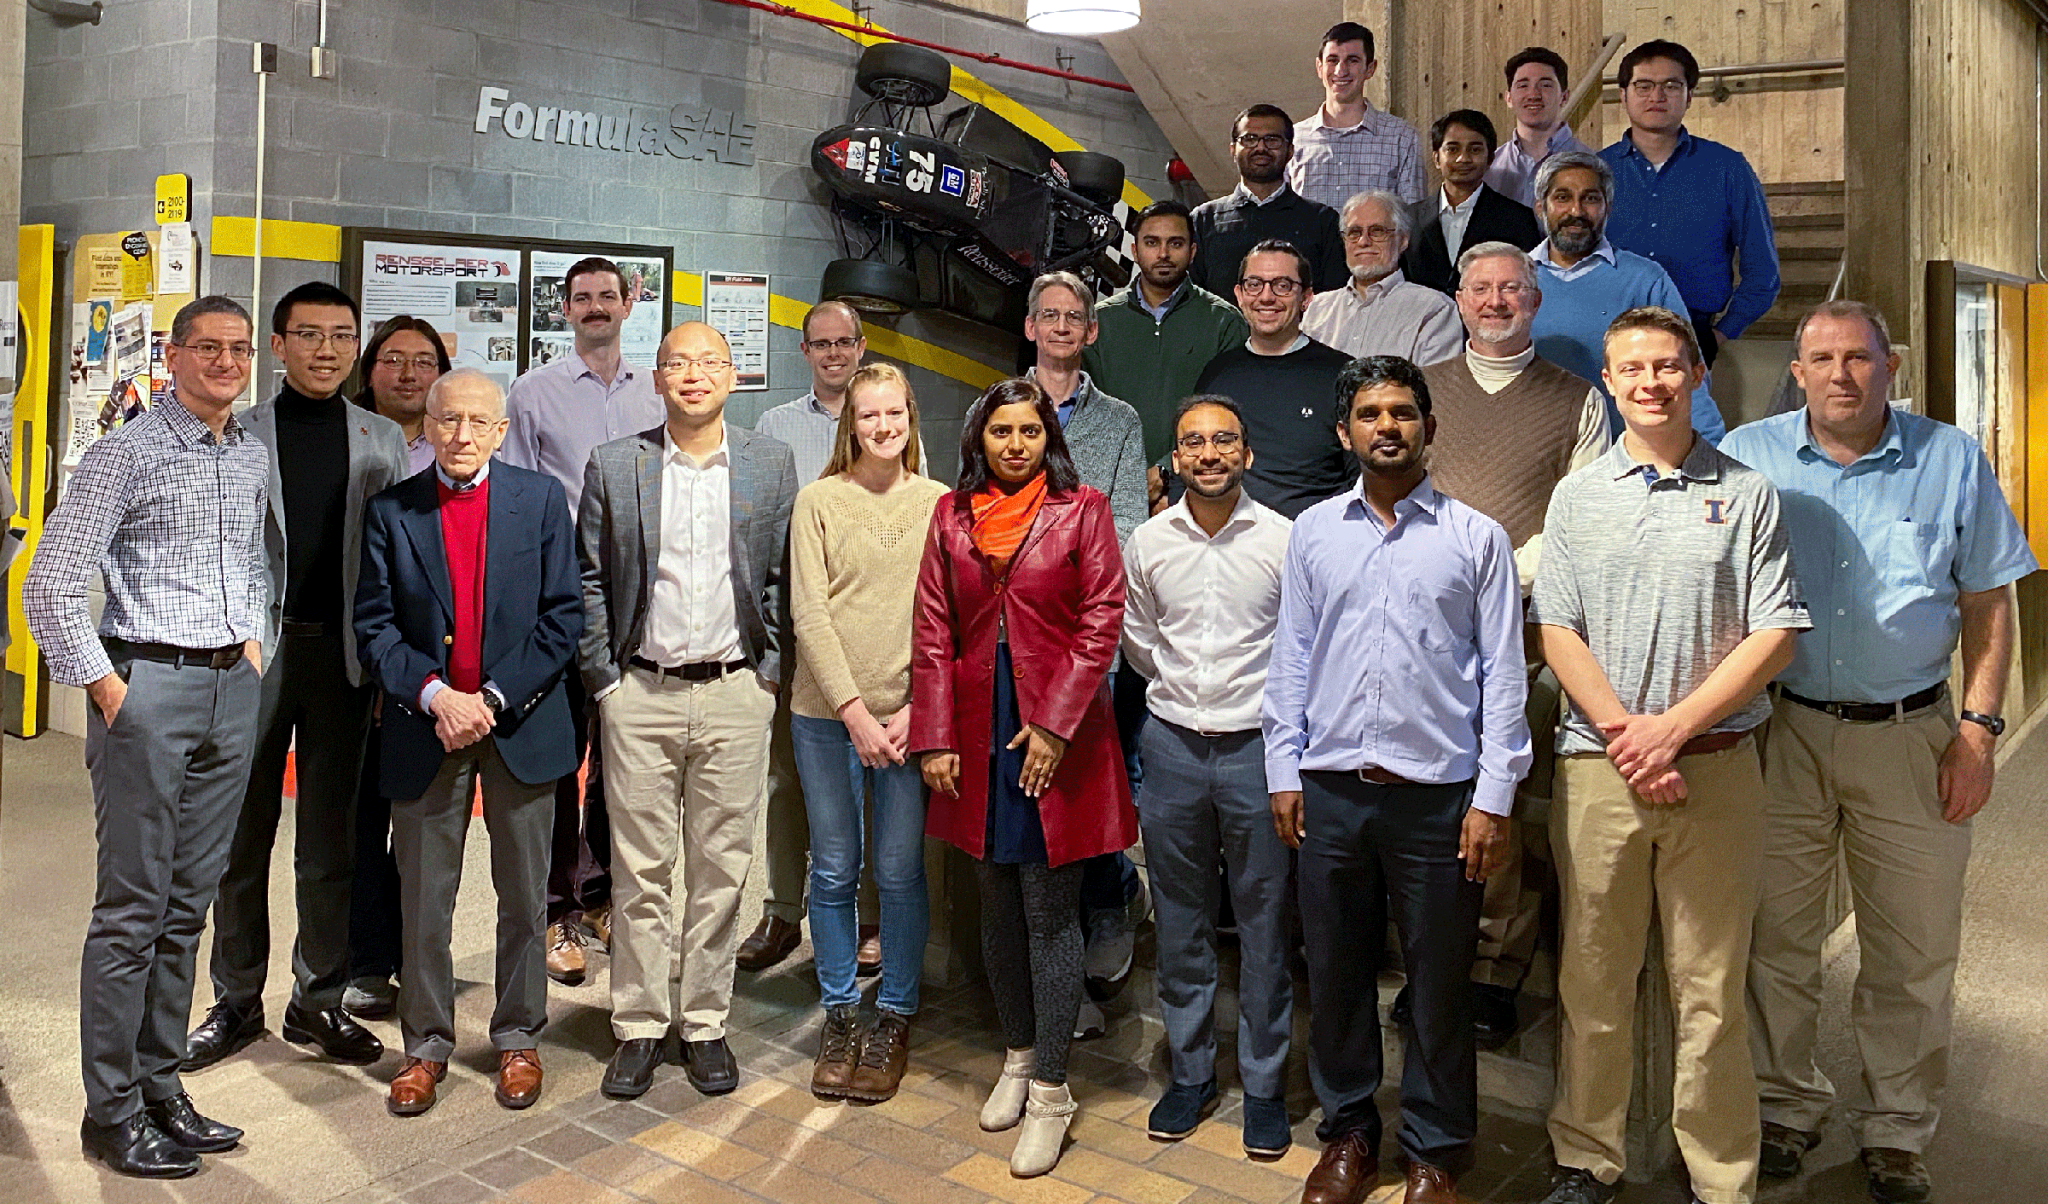 A team photo of the researchers affiliated with the Center for High-Efficiency Electrical Technologies for Aircraft (CHEETA) consortium pictured in 2020.